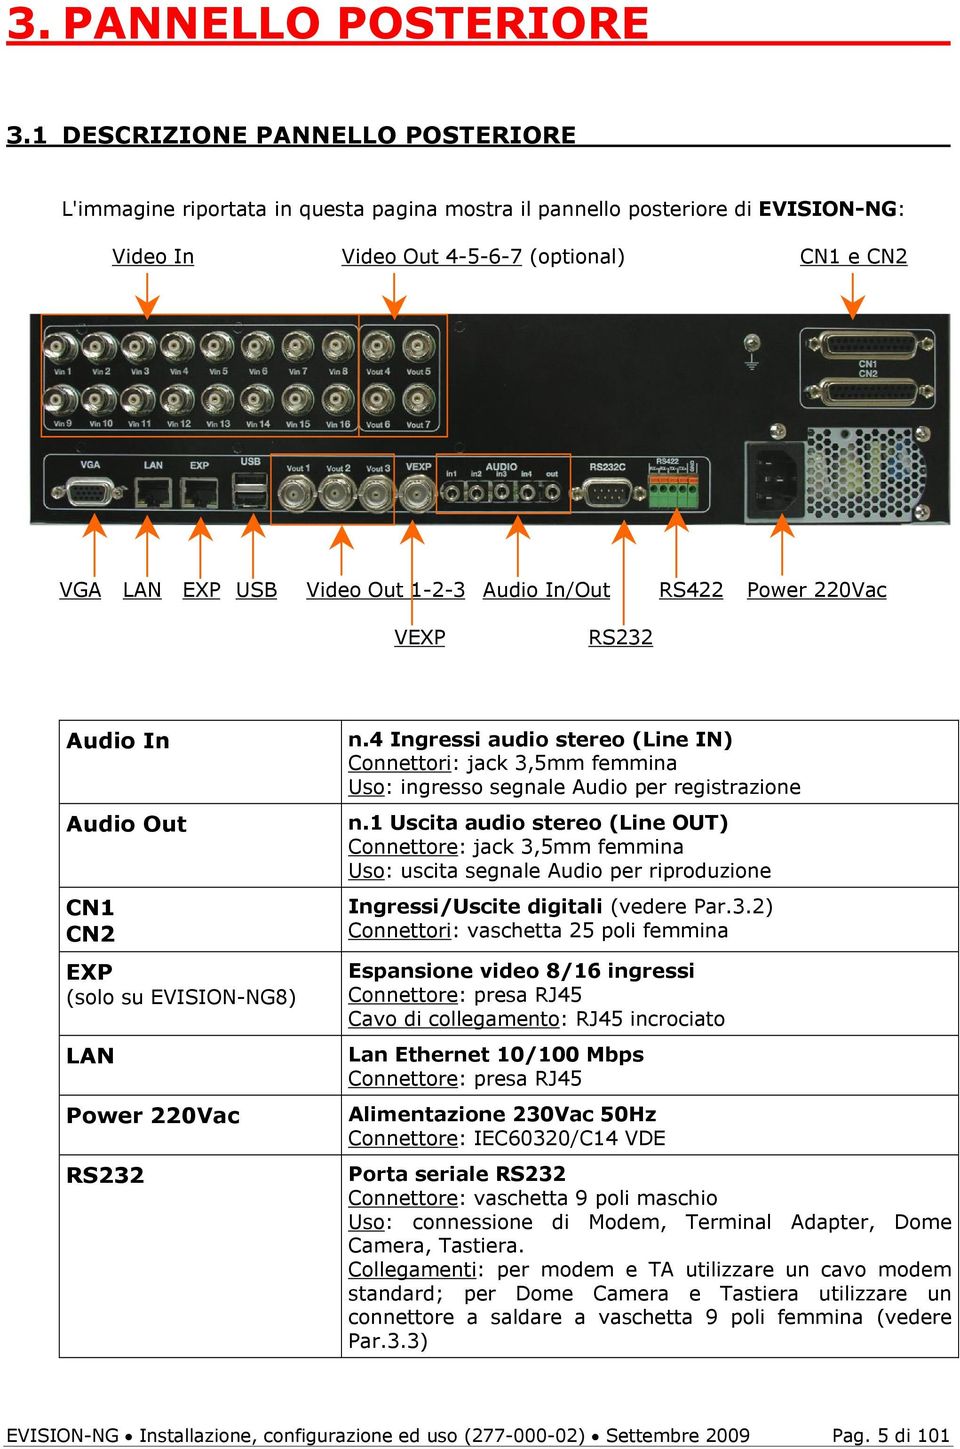 Audio In/Out RS422 Power 220Vac VEXP RS232 Audio In Audio Out CN1 CN2 EXP (solo su EVISION-NG8) LAN Power 220Vac RS232 n.